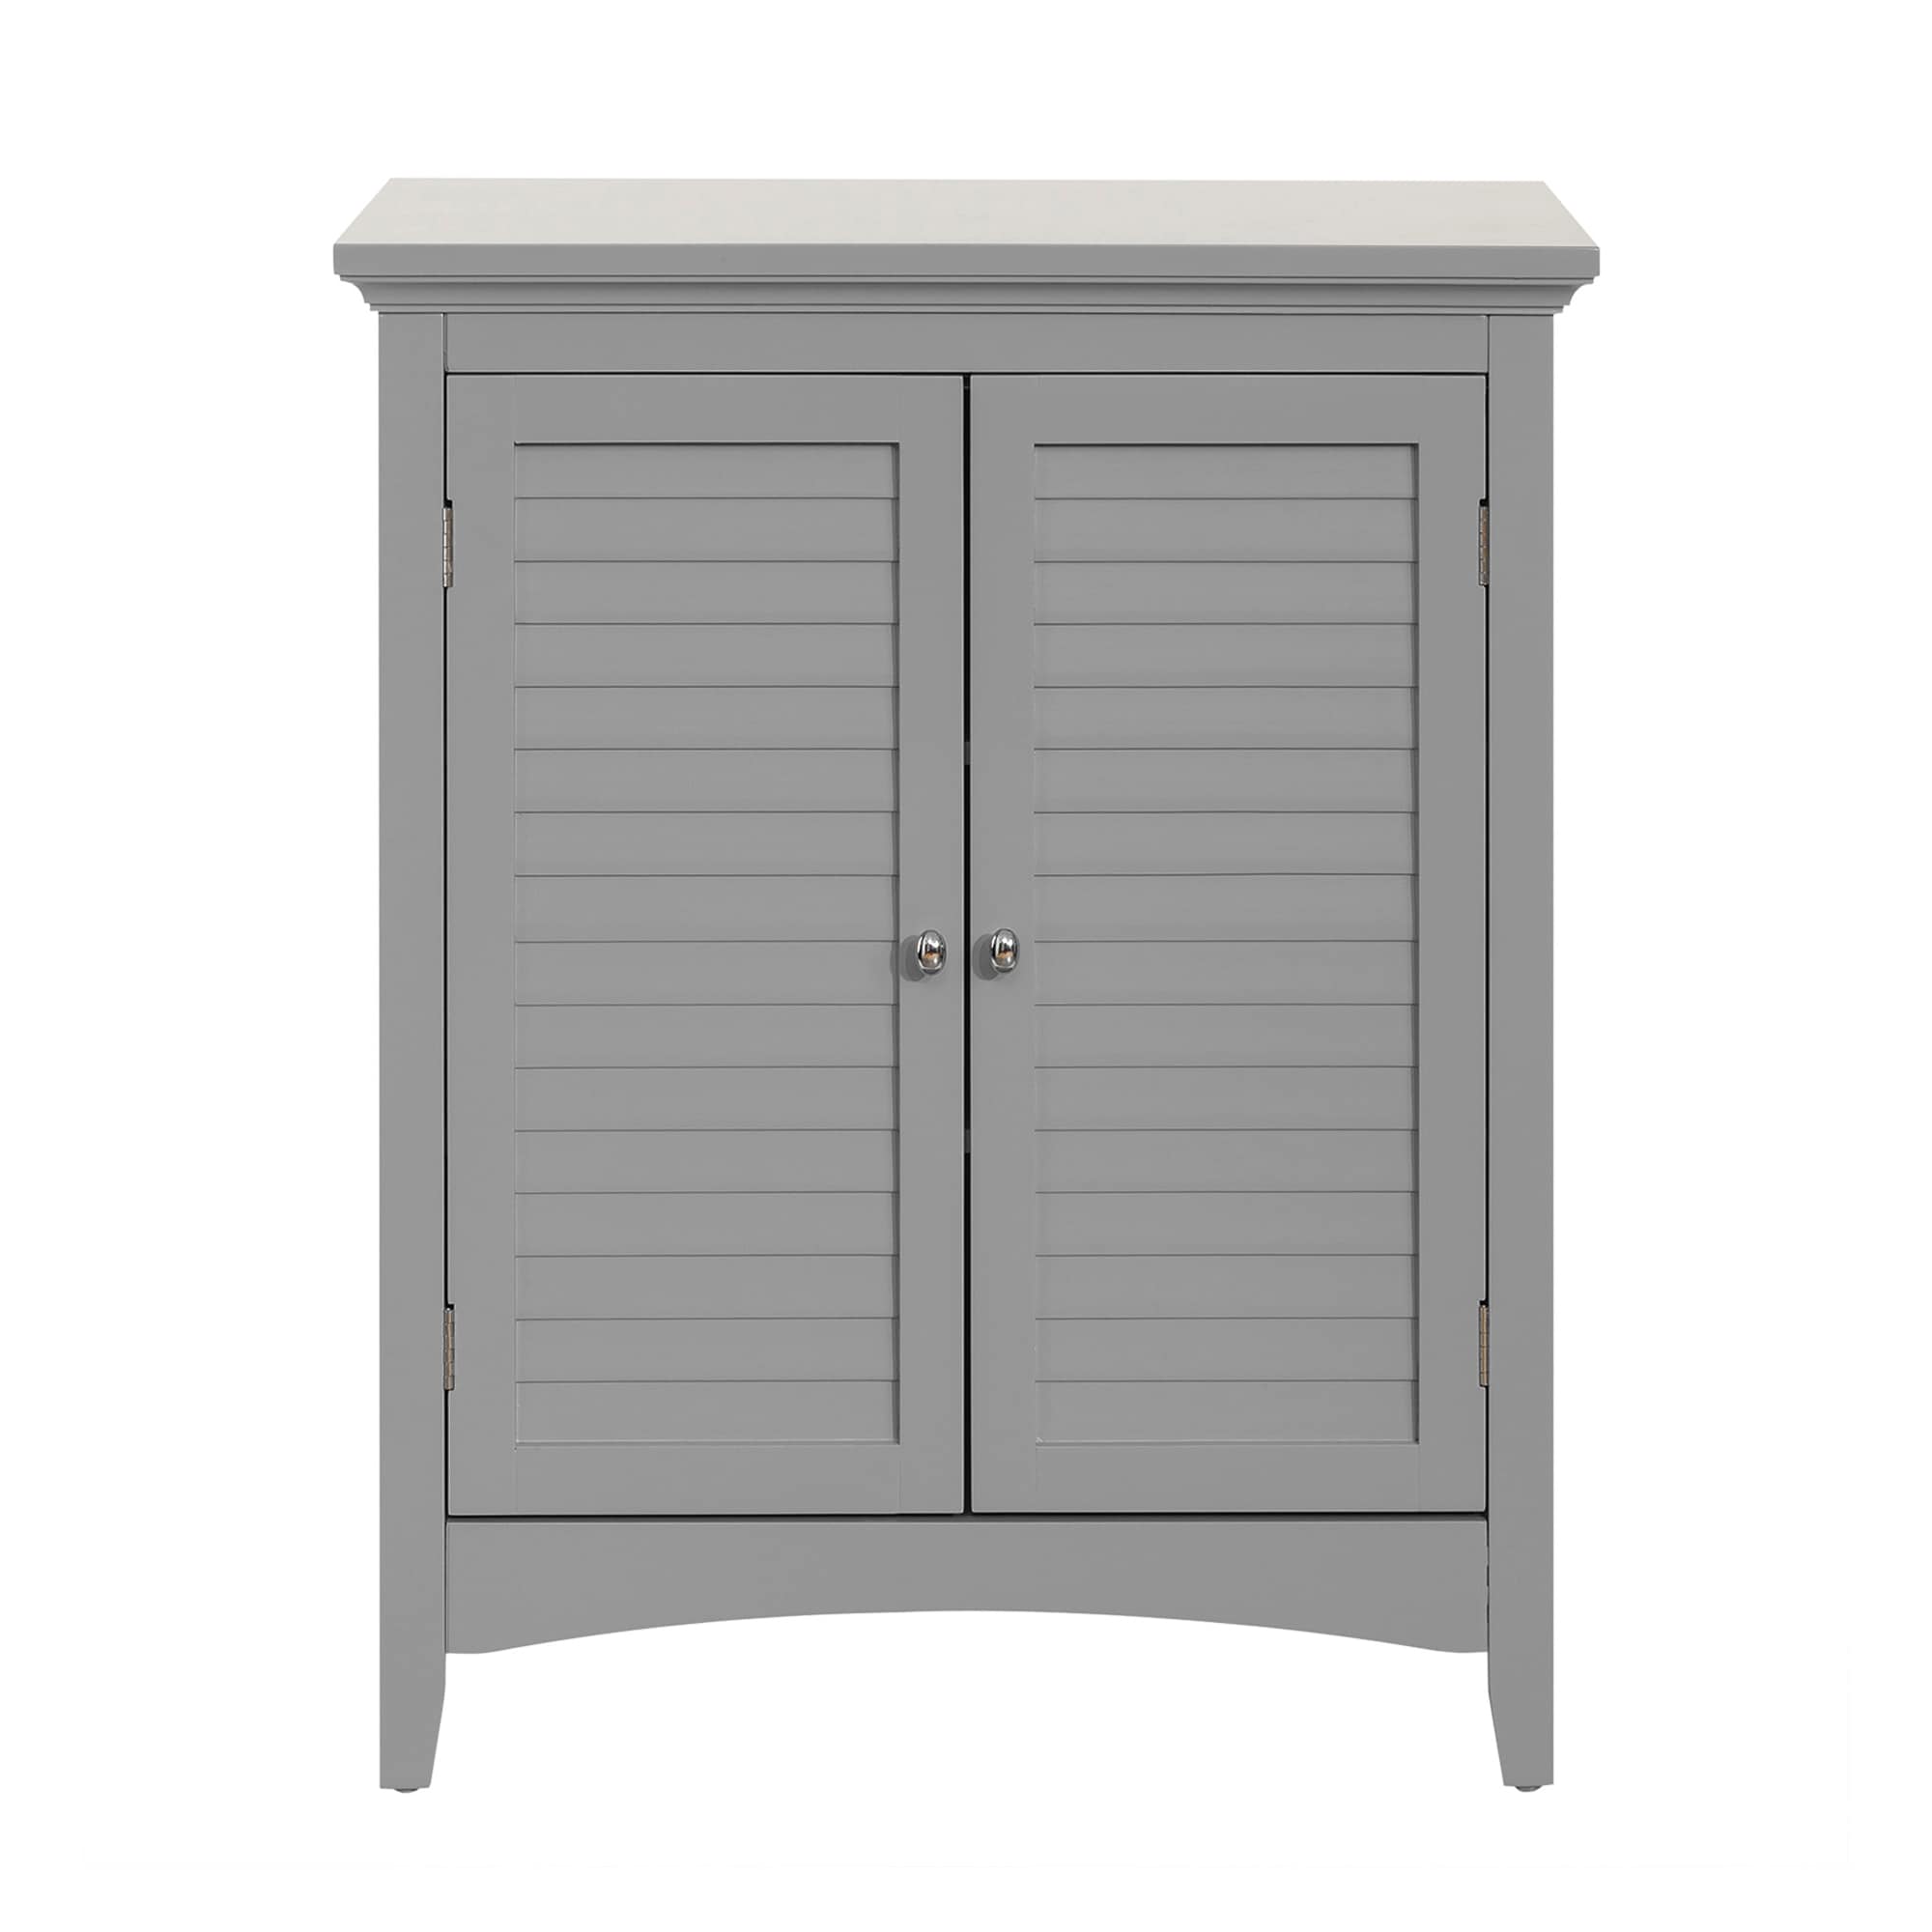 Elegant Home Fashions Glancy 2 Door Wooden Linen Tower Cabinet With Storage Gray for sale online 